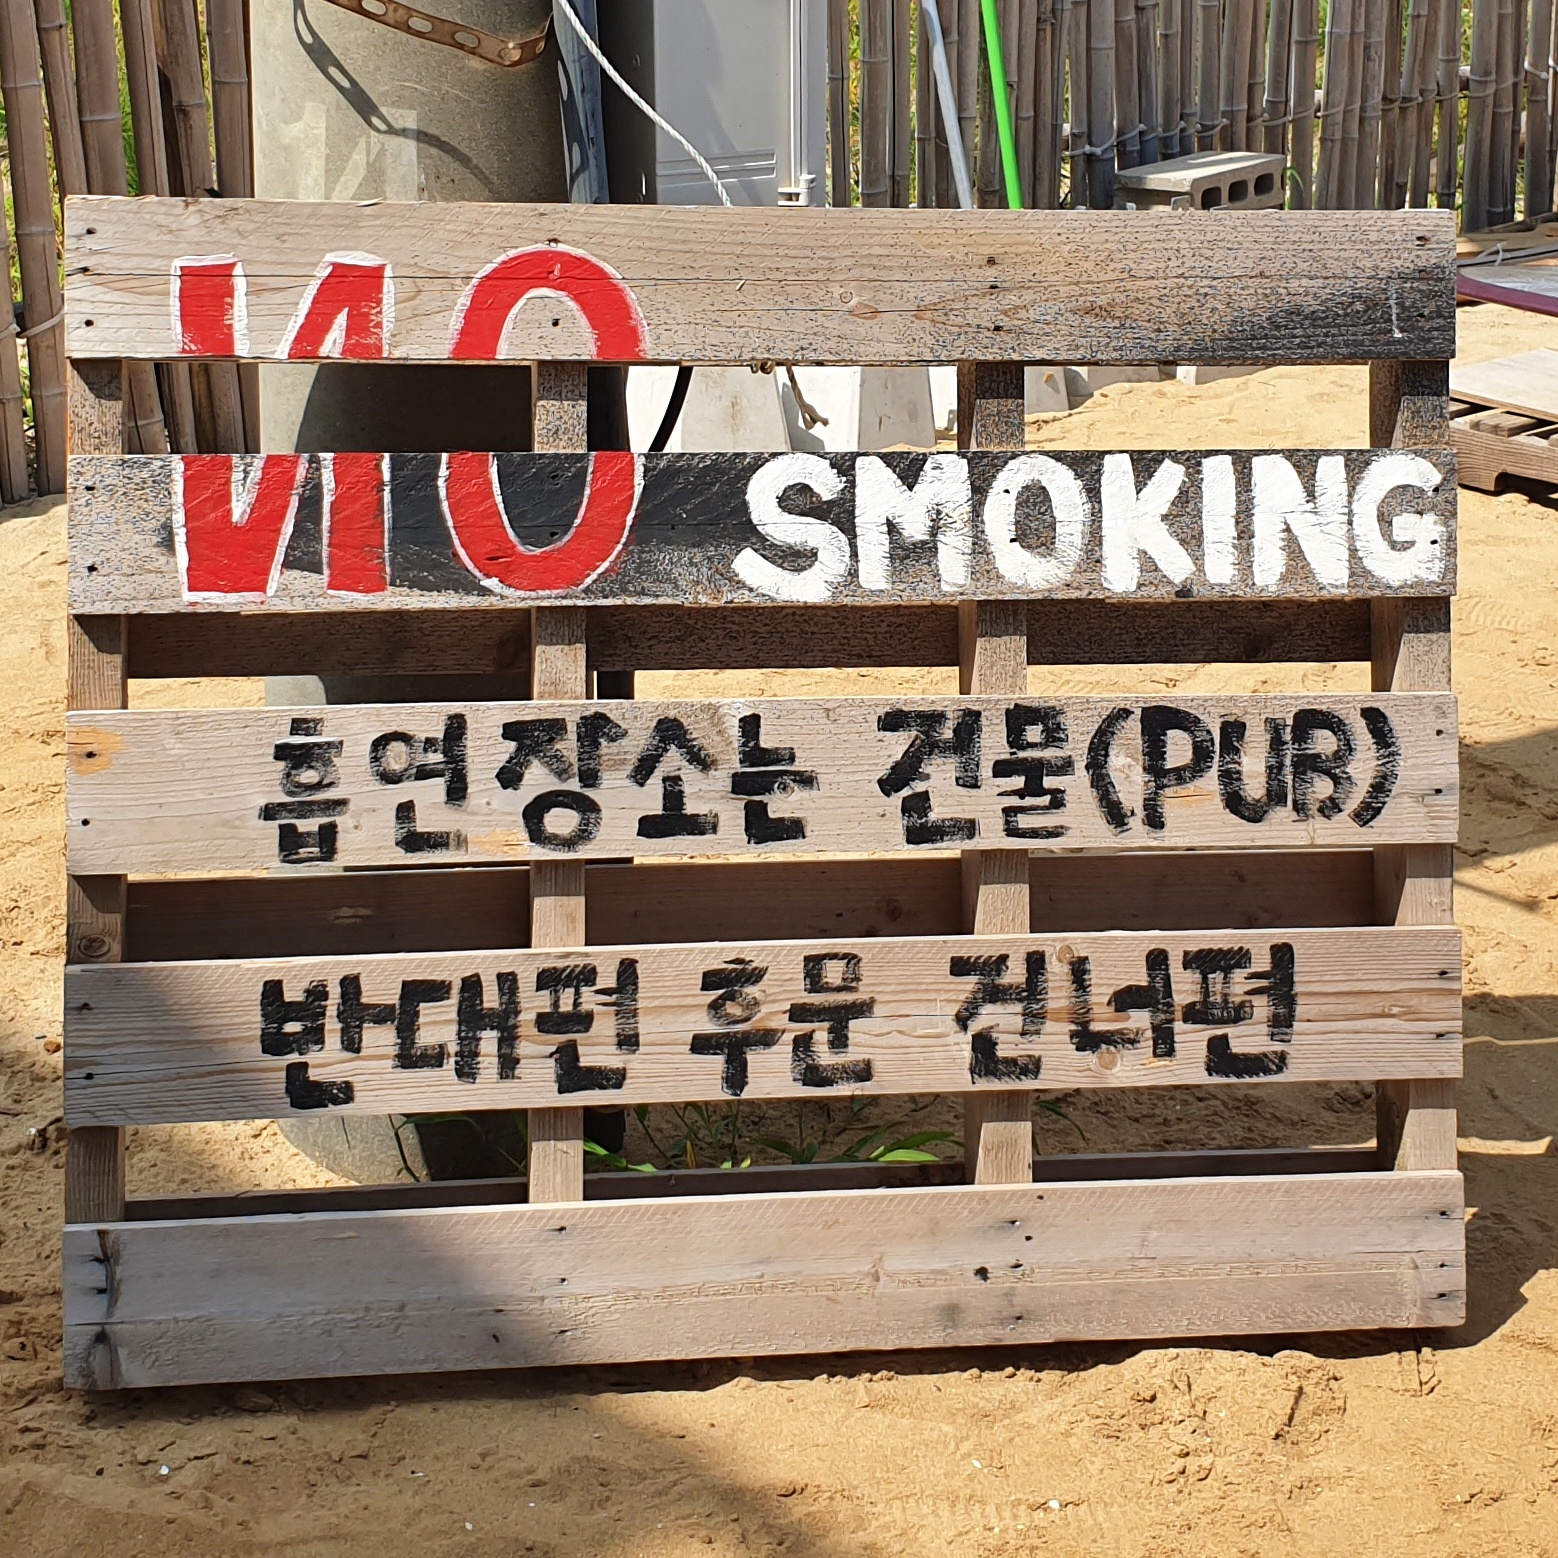 A No Smoking sign, with the N in No written backwards